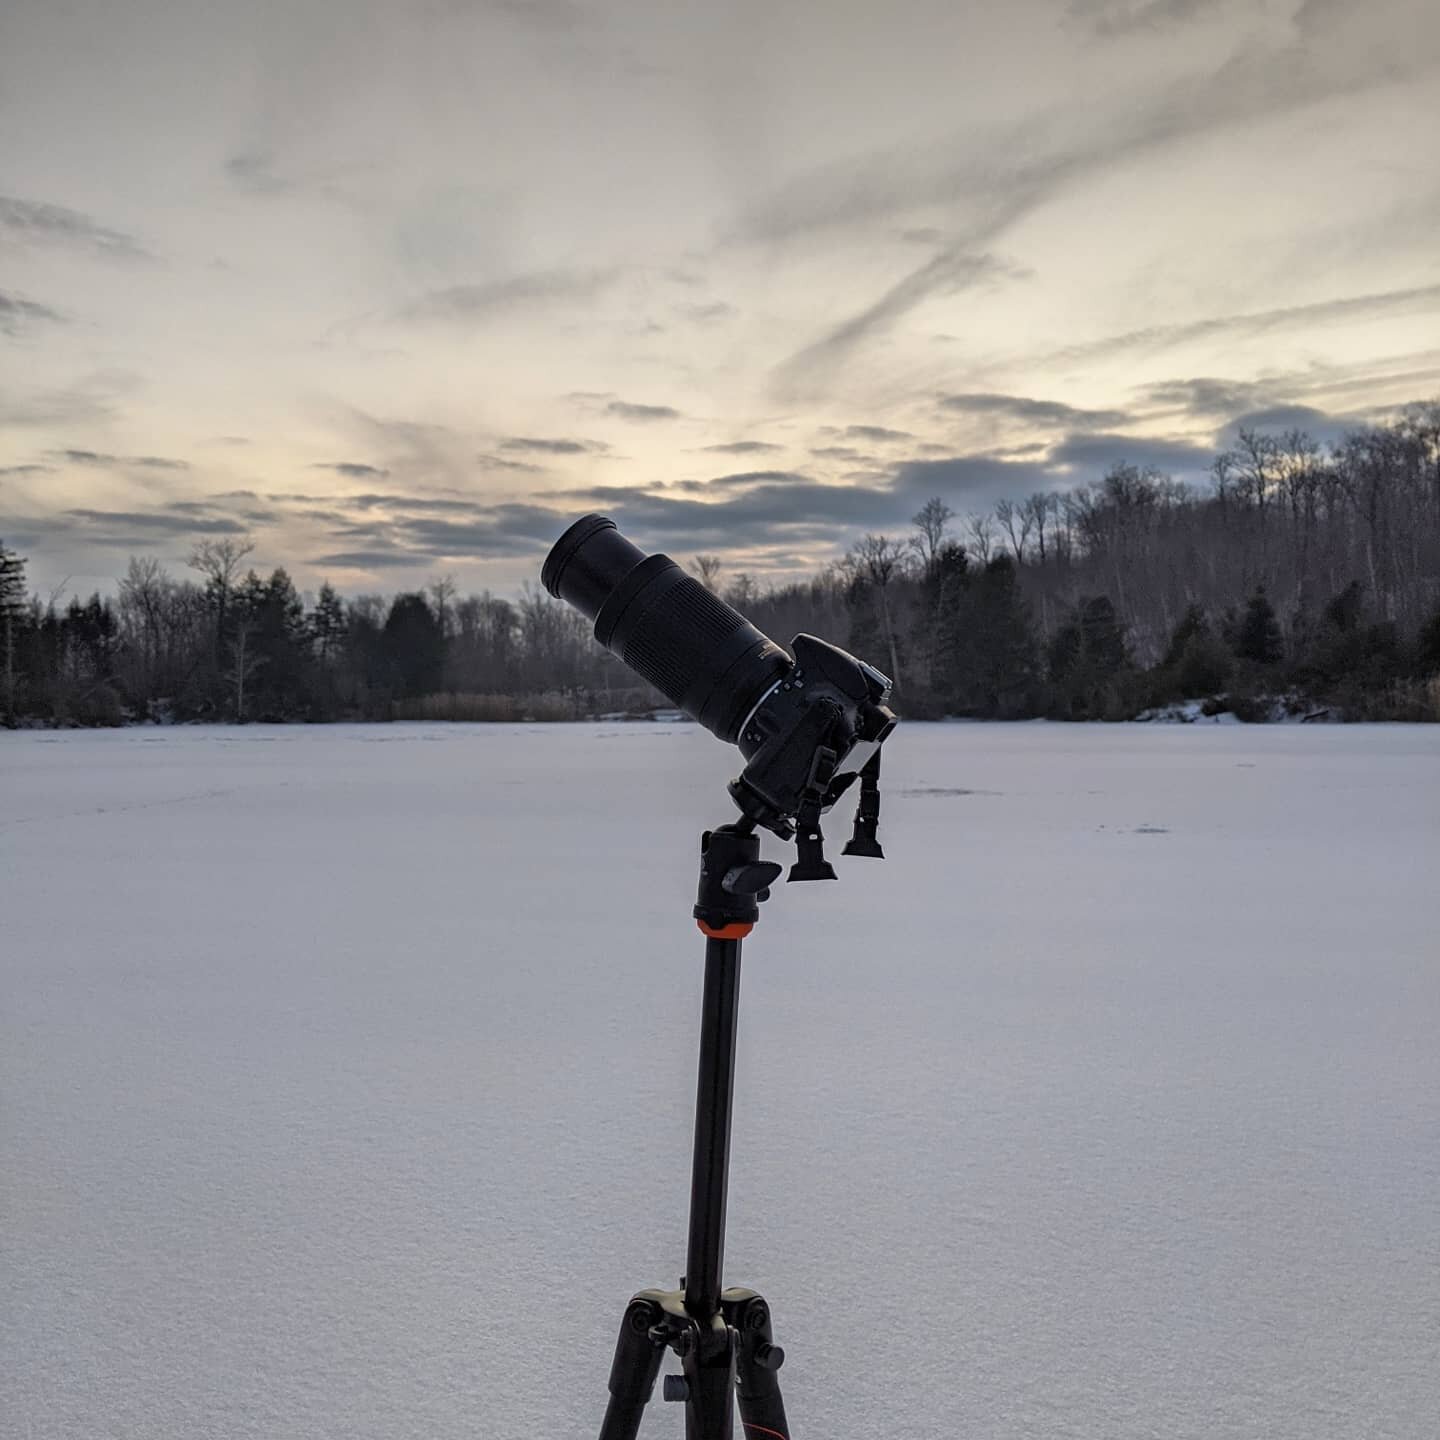 THE GREAT CONJUNCTION! I got a single good shot after an hour and a half at the center of the ice, but it was worth it! 

Photos:
1- camera setup on the ice 
2- more camera 
3- Tracks on the ice from a &quot;Fisher Cat&quot;, Pekania pennanti. Relati